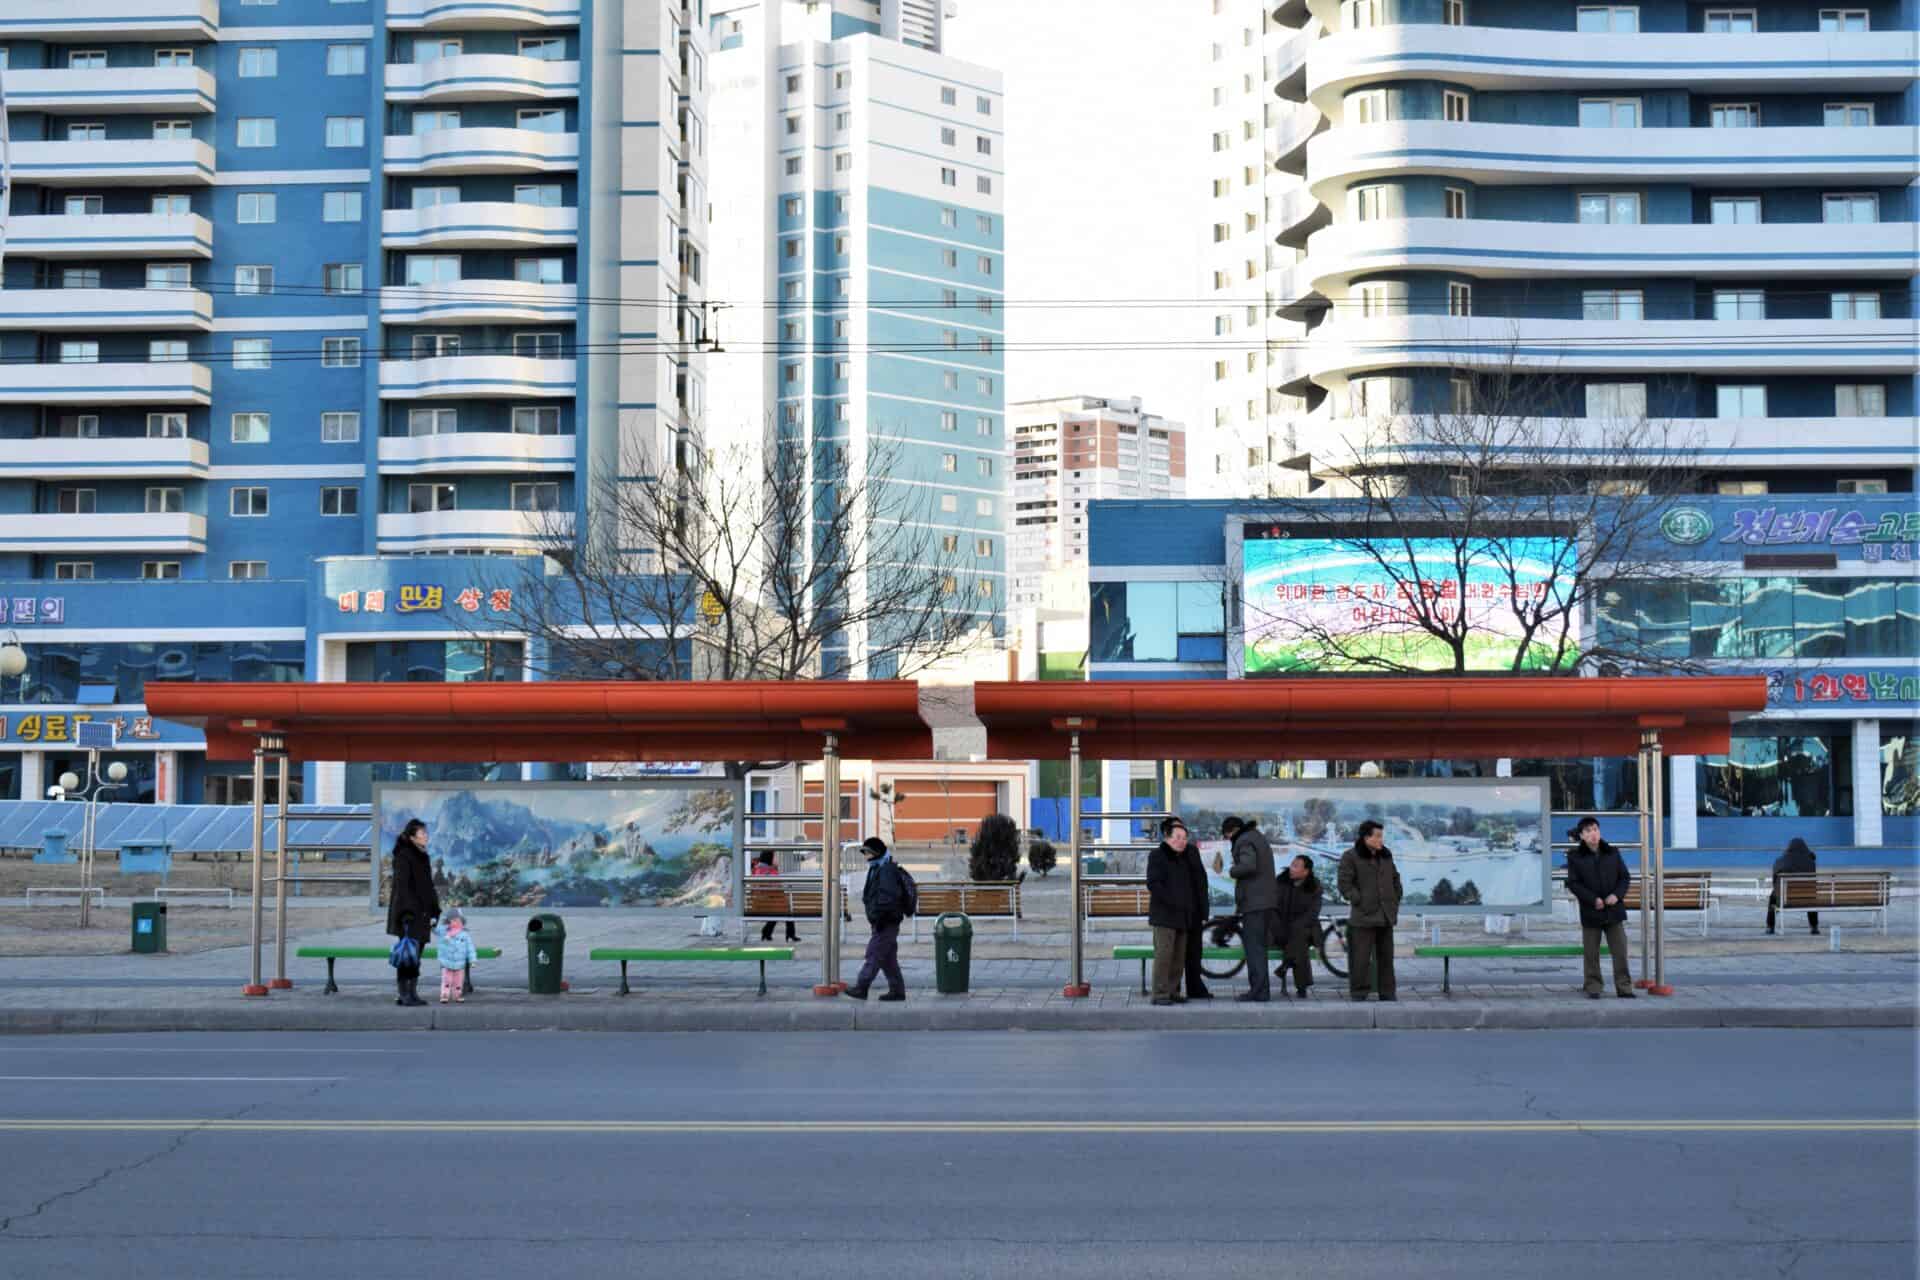 people waiting for the bus in front of blue coloured buildings in North Korea's capital Pyongyang